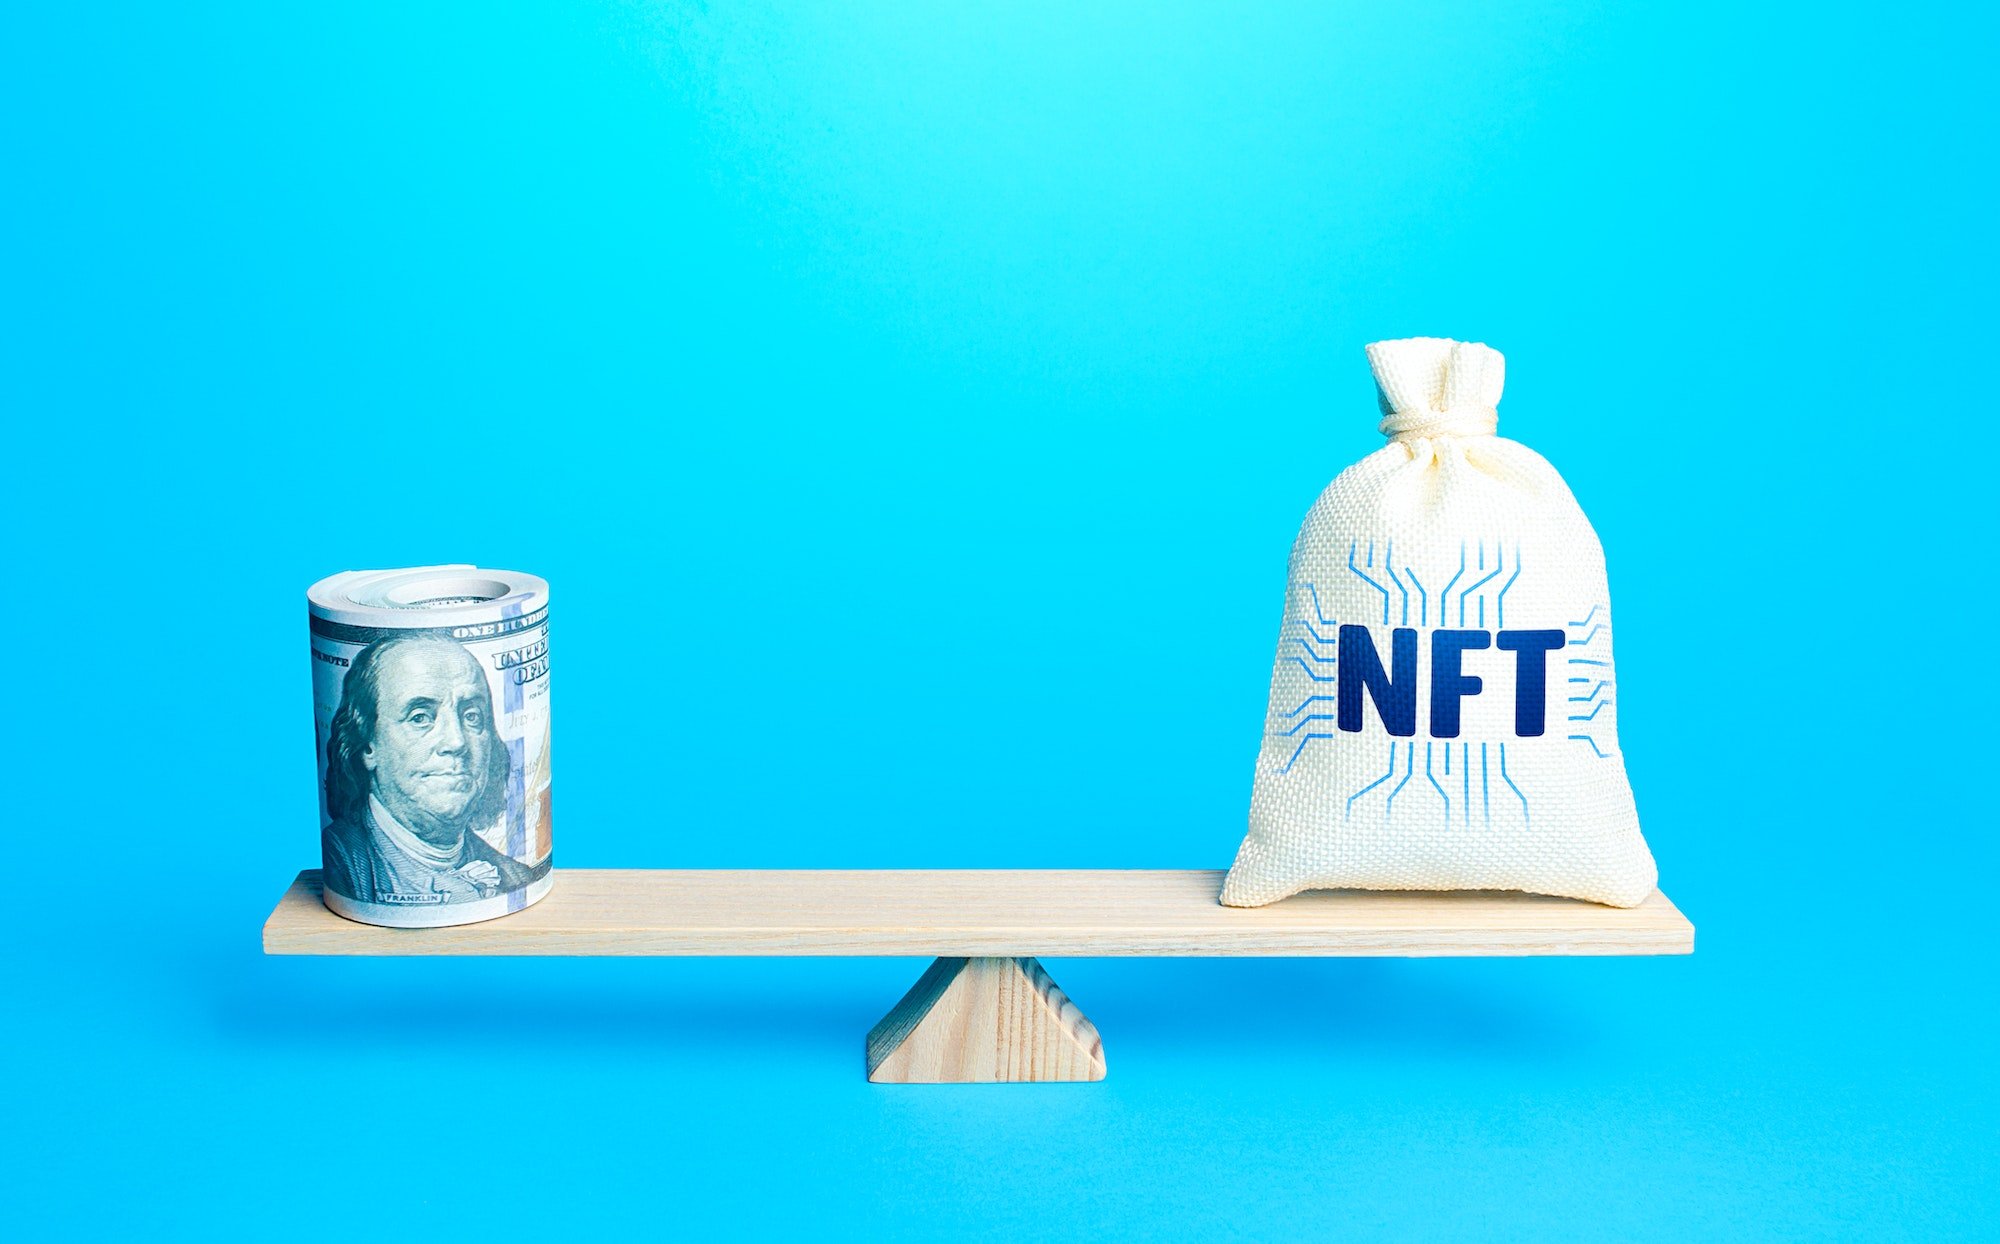 Bag with NFT non-fungible token and a bundle of dollars on scales.